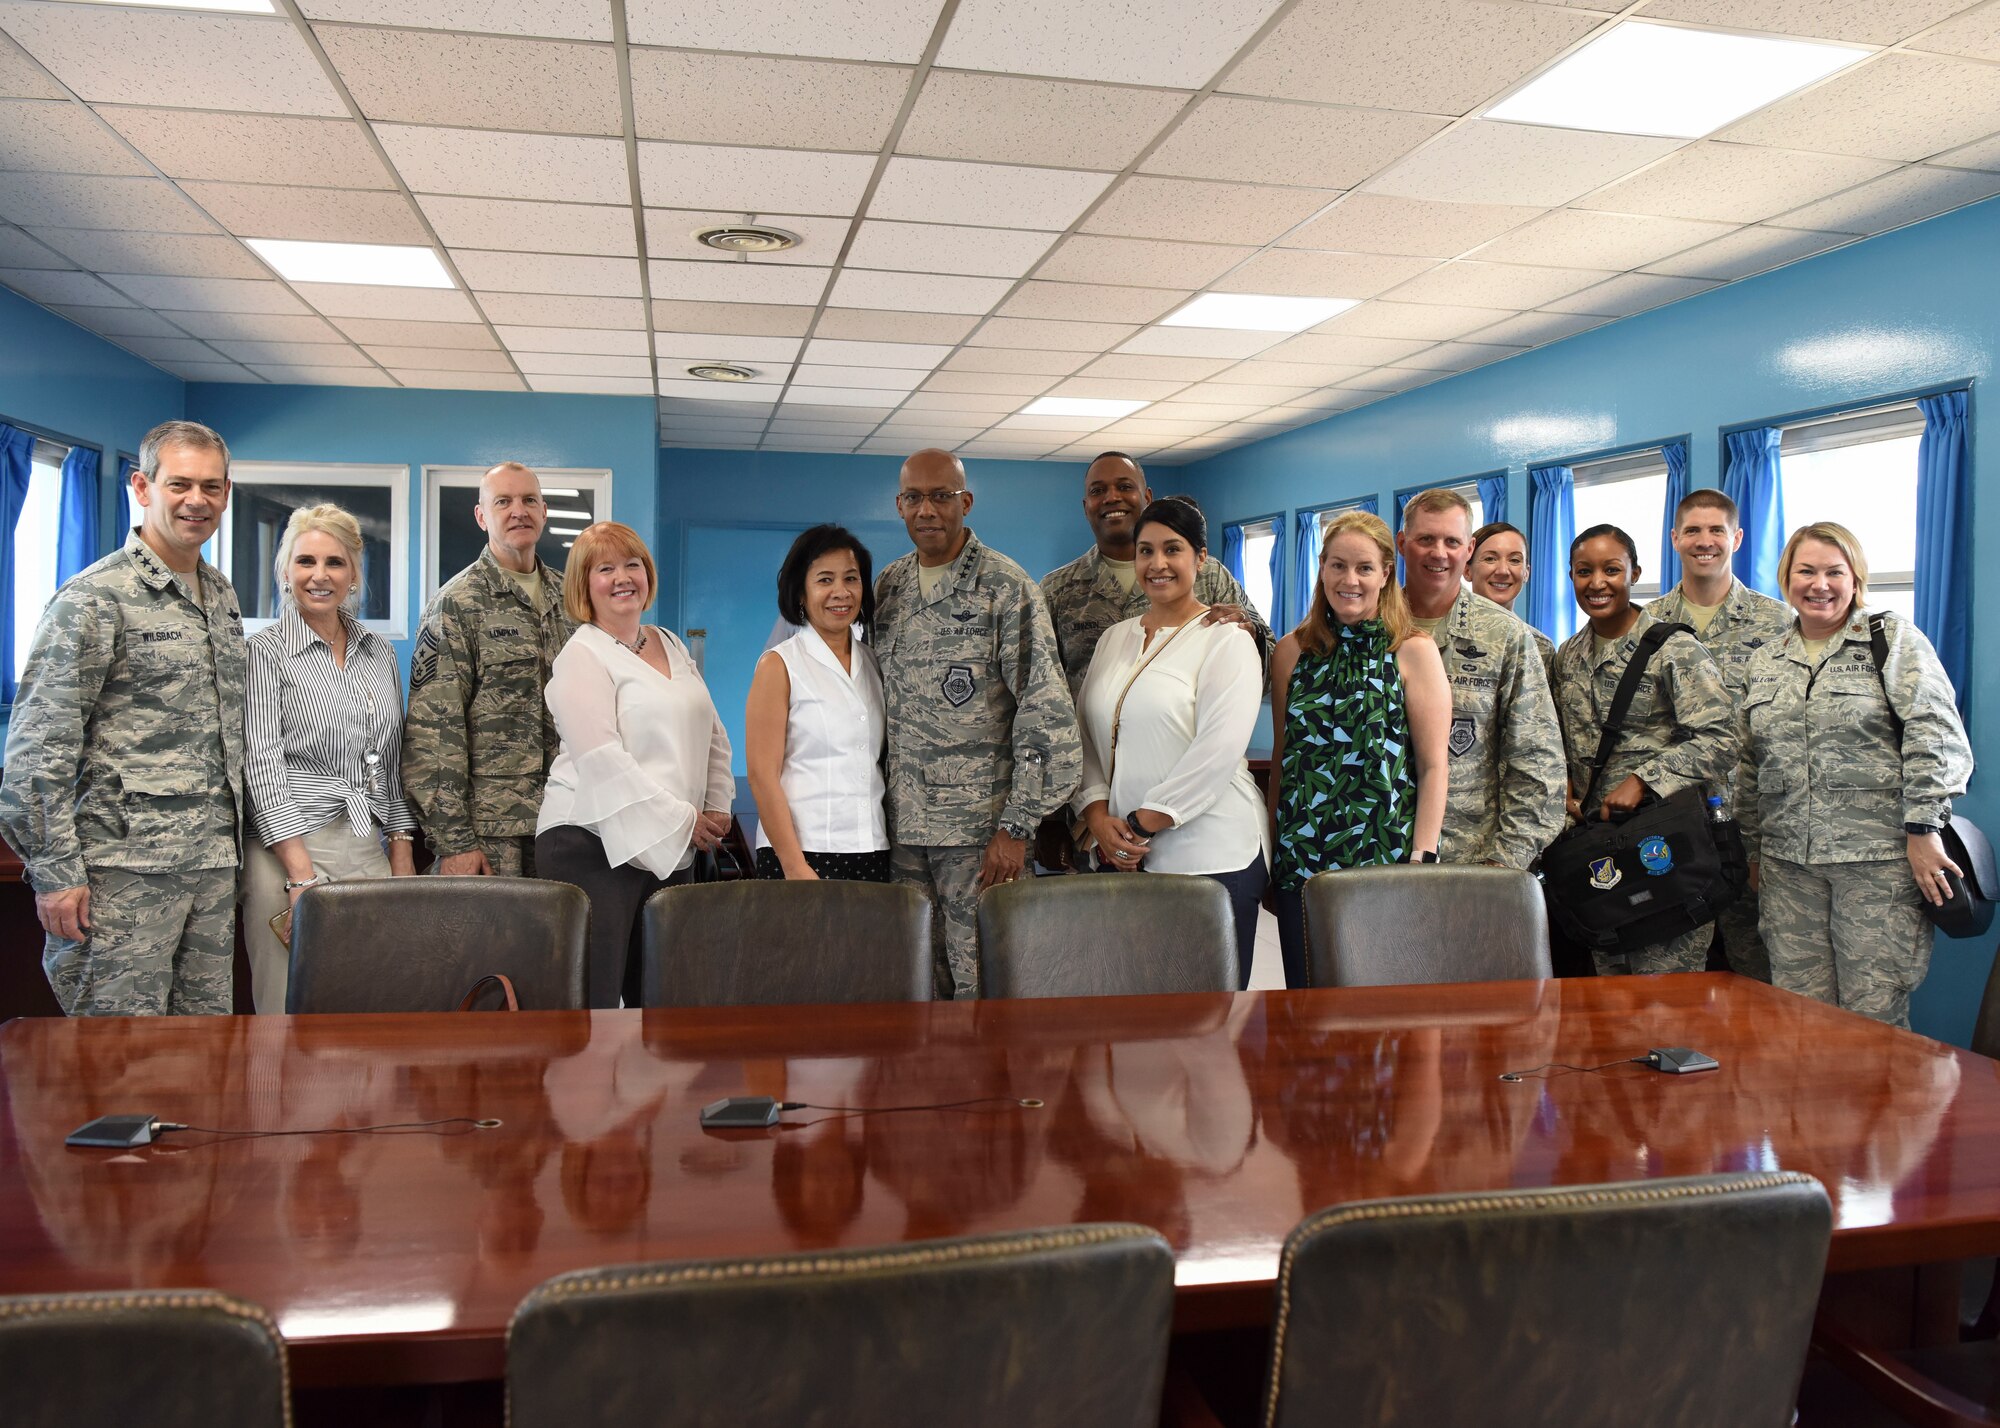 (Left to right) Lt. Gen. Kenneth Wilsbach, Seventh Air Force commander, his wife Cindy, Chief Master Sgt. Scott Lumpkin, Seventh Air Force command chief, his wife Meg, Gen. CQ Brown, Jr., Pacific Air Forces commander, his wife Sharene, Chief Master Sgt. Anthony Johnson, Pacific Air Forces command chief, his wife Stephanie, Lt. Gen. Thomas Bergeson, former Seventh Air Force commander, his wife Pamela, Capt. Lisa Gund, Seventh Air Force aide-de-camp, Brig. Gen. Lance Pilch, Seventh Air Force deputy commander, and Maj. Megan Mallone, 607th Air Operations Center legal advisor, pose for a photo inside a UNC Military Armistice Committee conference room at the Joint Security Area August 26, 2018. The room sits on top of the demarcation line, meaning the group is technically standing inside the Democratic People’s Republic of Korea. (U.S. Air Force photo by Airman 1st Class Ilyana Escalona)